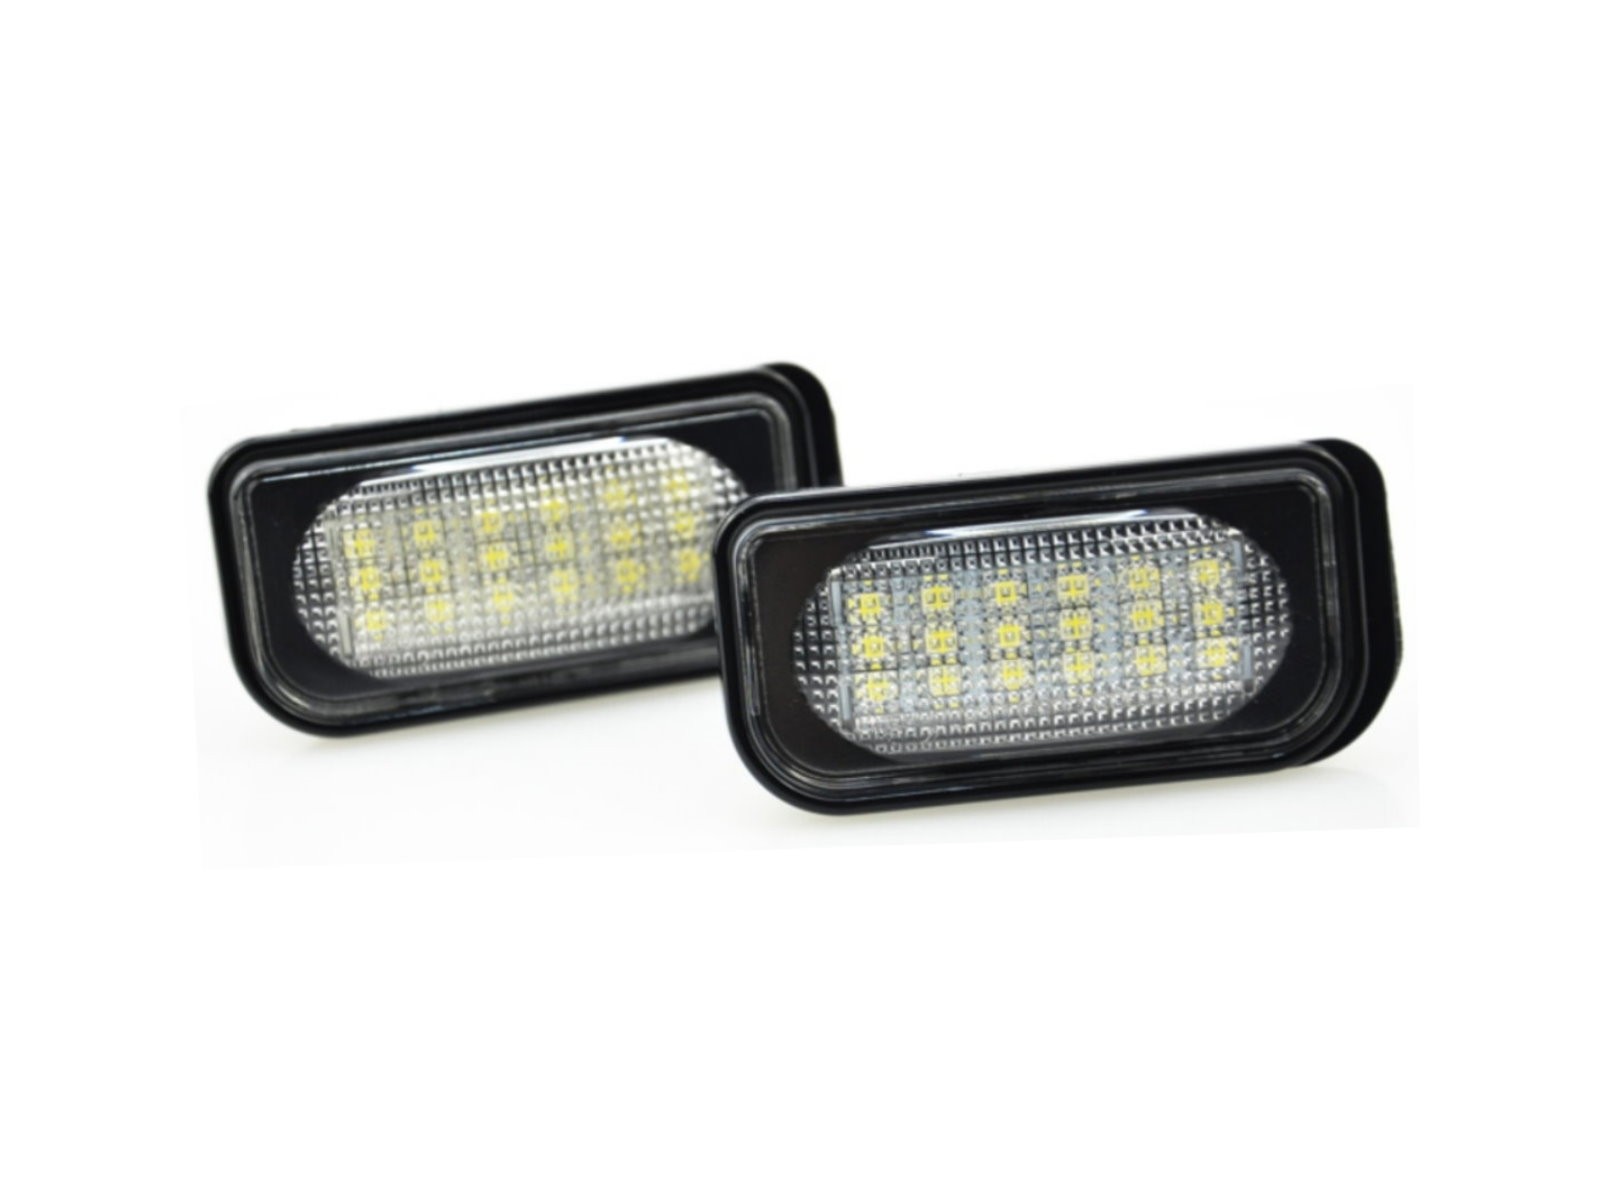 CrazyTheGod C-CLASS W203 Second generation 2000-2007 Sedan 4D LED W/ Canbus License Lamp White for Mercedes-Benz